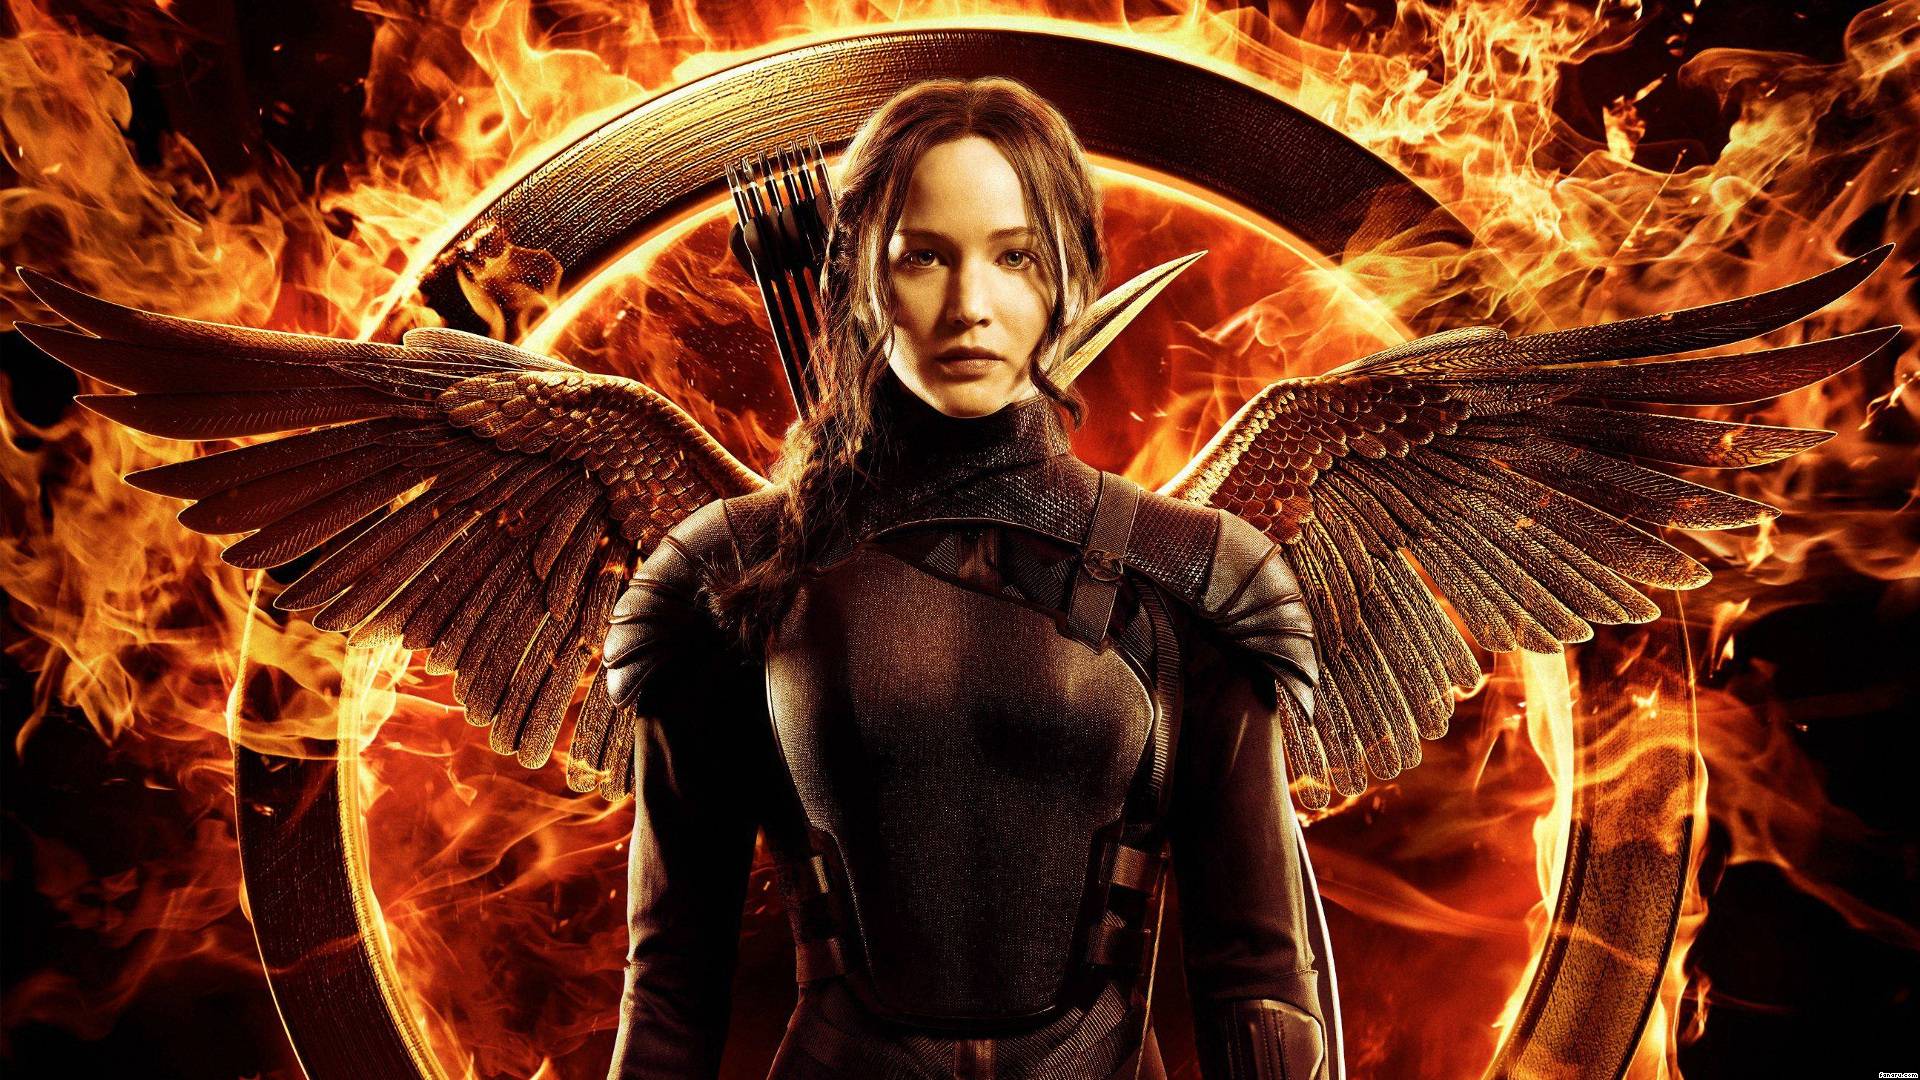 LA VOZ WEEKLY : MOVIE REVIEW: “The Hunger Games: Mockingjay Part One” stays true to the book series